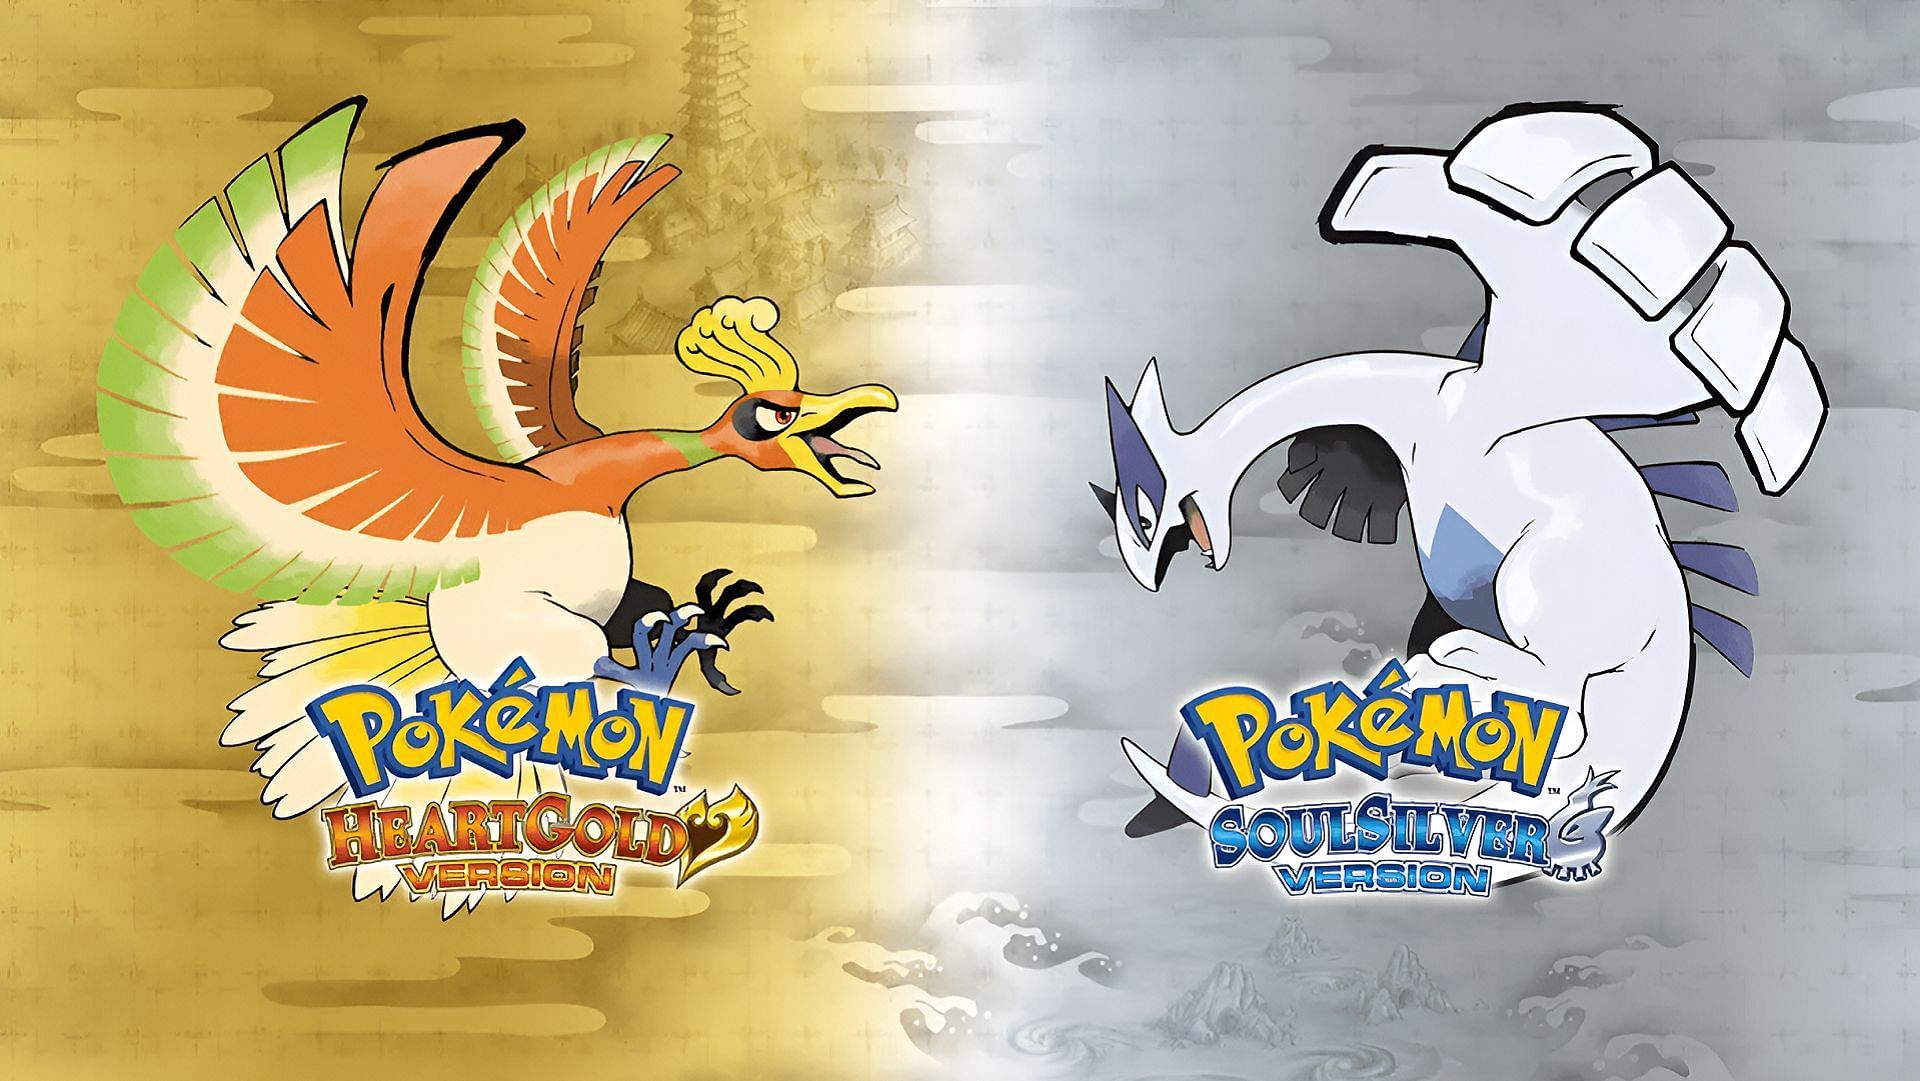 HeartGold and SoulSilver bridged the gap between new and old fans (Image via The Pokemon Company)